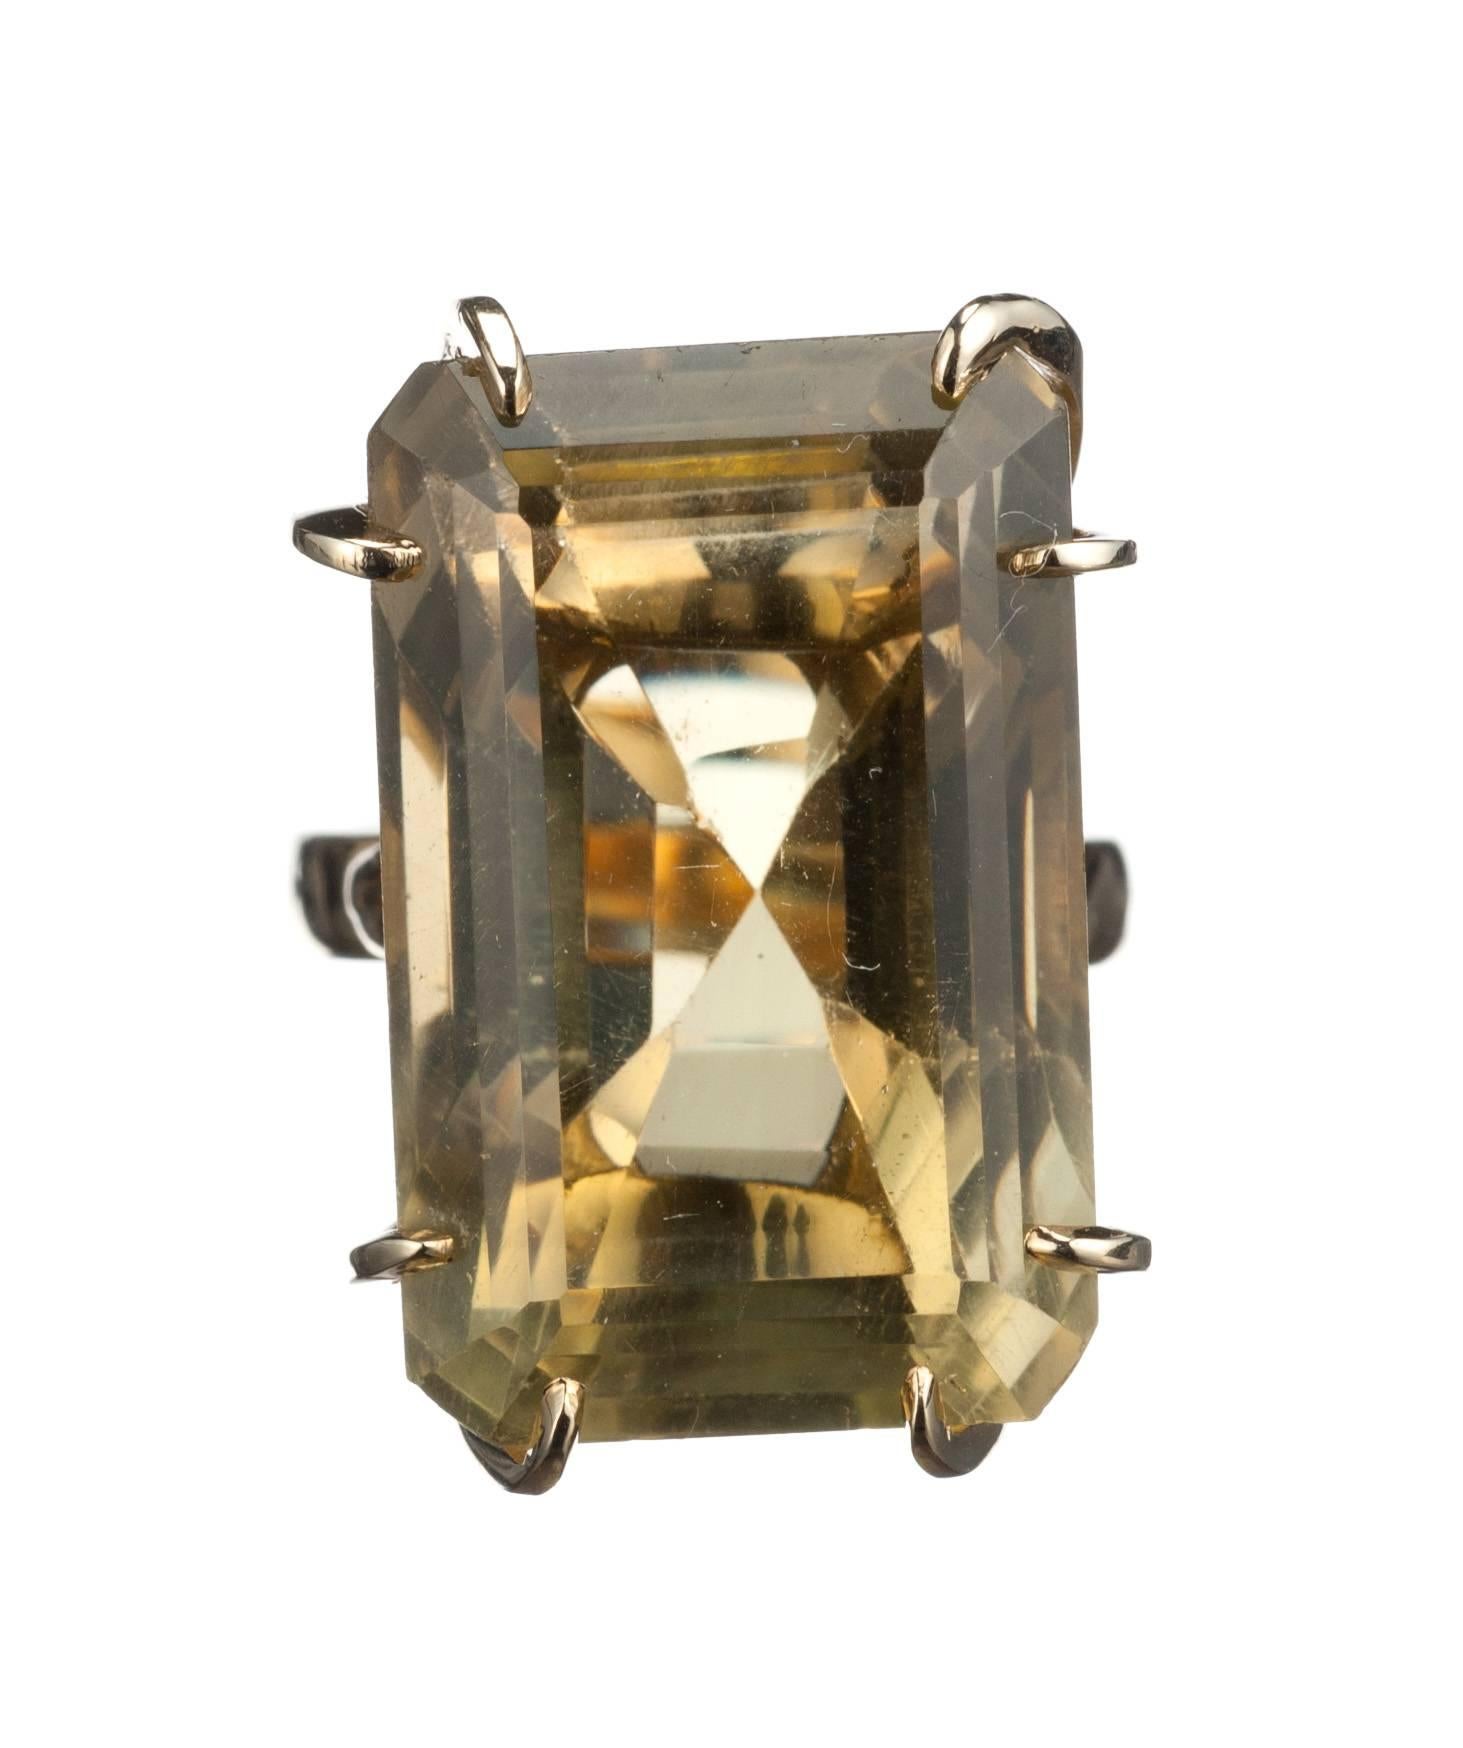 A bold cocktail ring composed of 14-karat yellow gold and set with a remarkable emerald-cut citrine, approx. 40.43ct. Fits a size 7 finger with an additional spring guard to accommodate larger knuckles. Citrine measures approx. 1” long by 0.5” wide. 